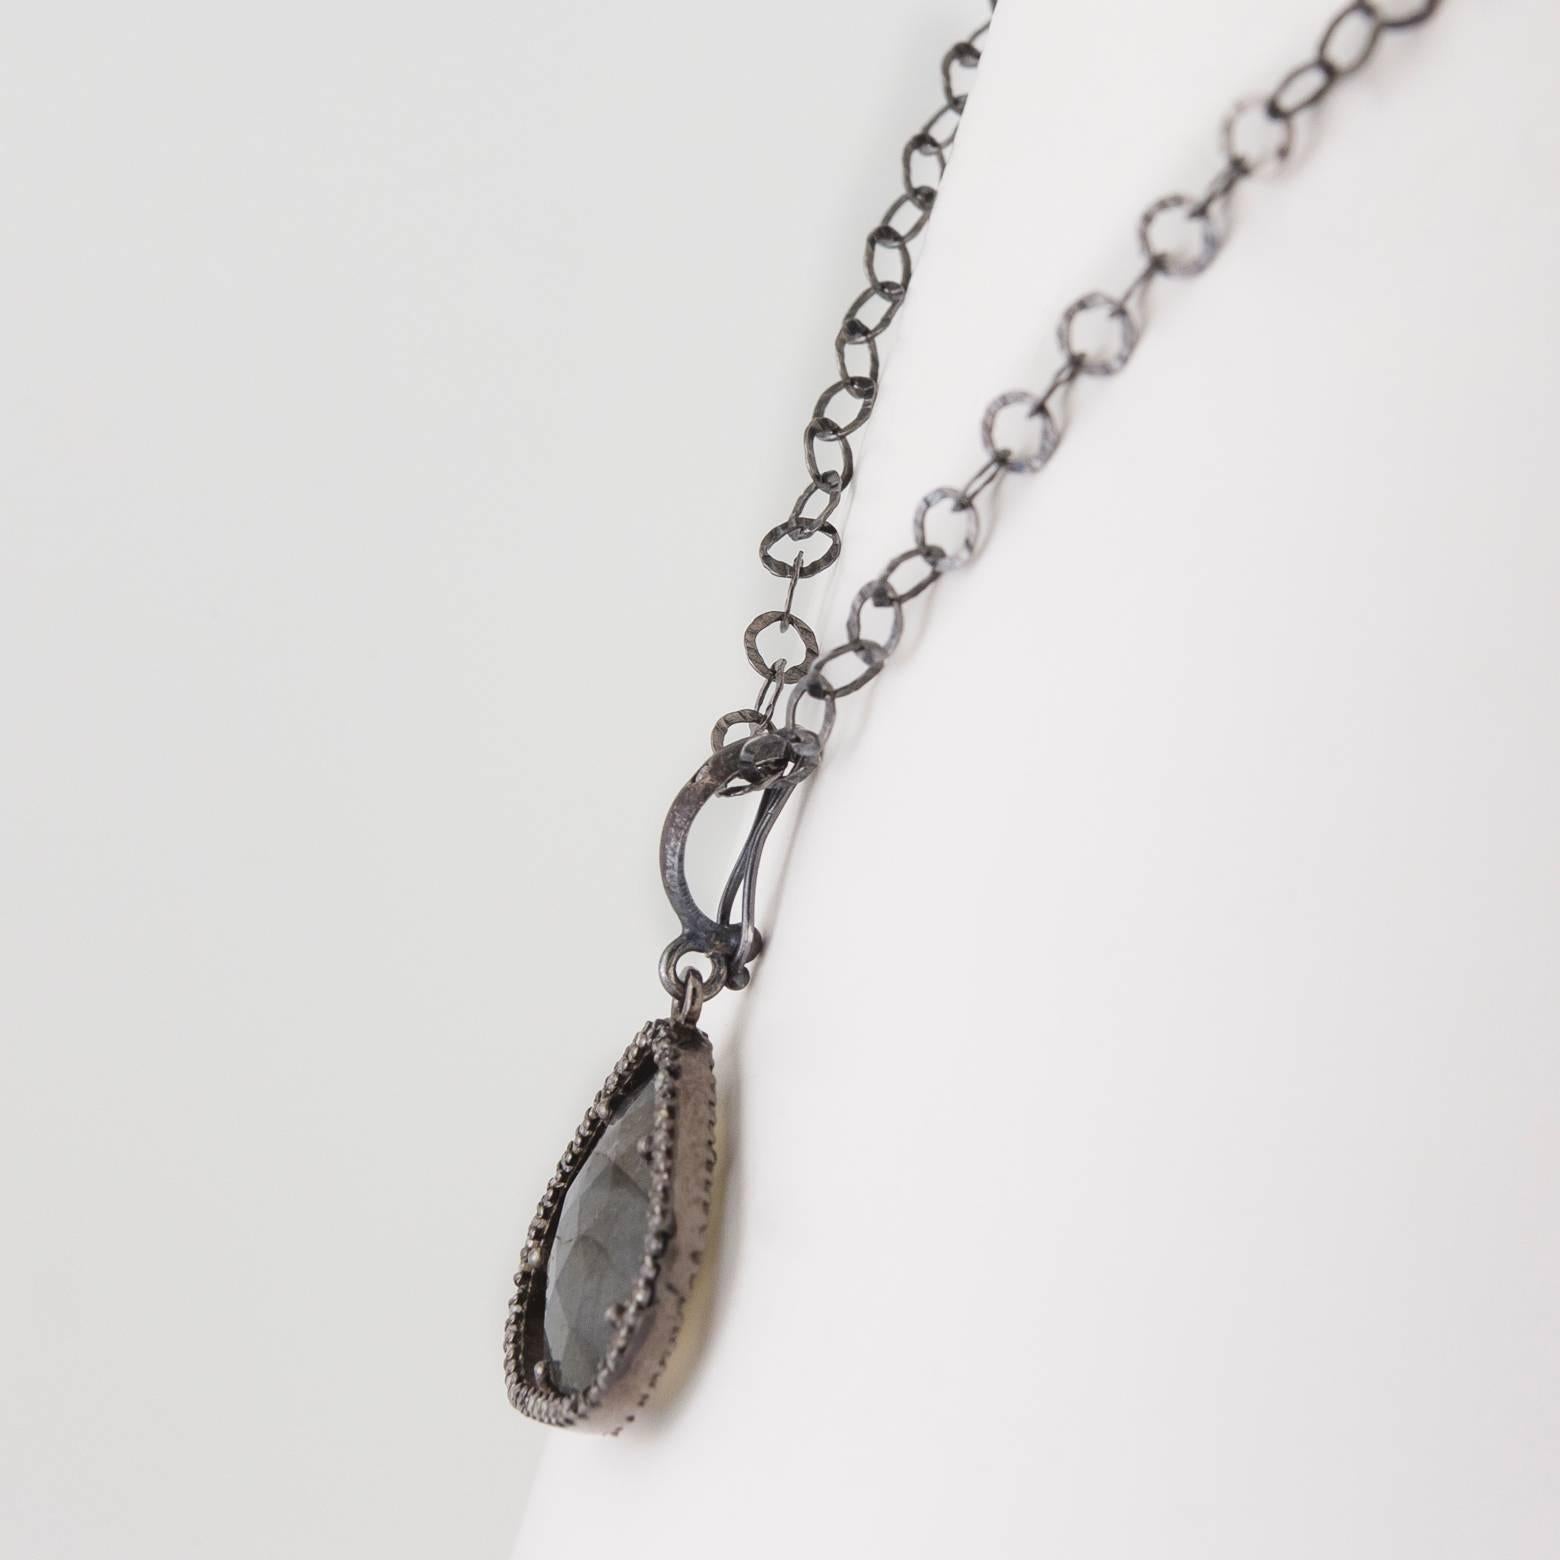 Labradorite and Diamond Oxidized Sterling Silver Pendant. This beautiful, iridescent, gorgeous labradorite pendant is surrounded with a diamond glow and shines in every angle. This exquisite piece of labradorite reflects grays, greens and blues and